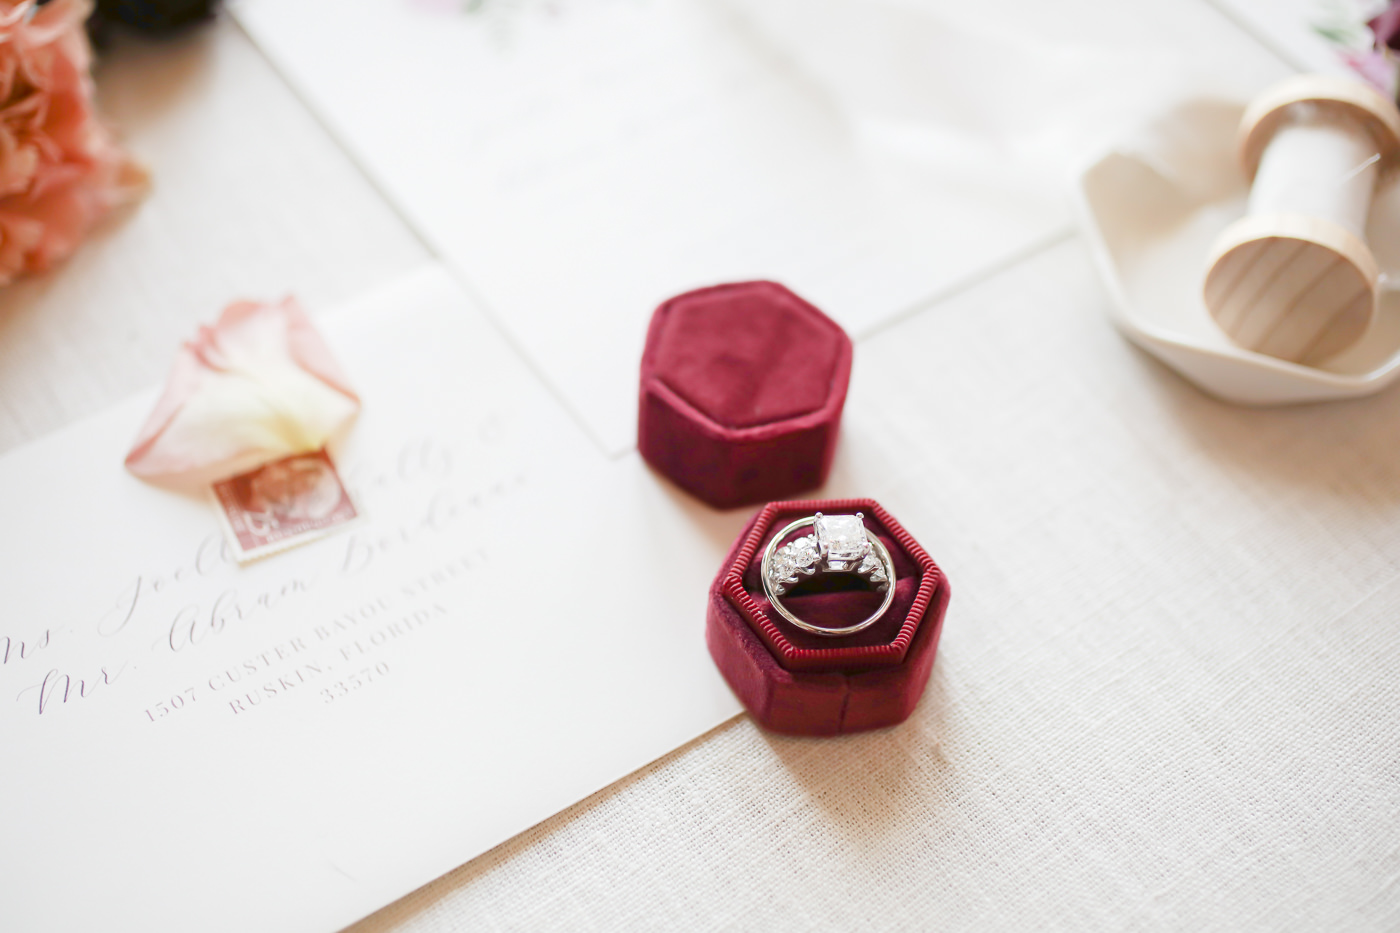 Wine Red Hexagonal Velvet Ring Box with Cushion Cut Diamond Engagement Ring | Wedding Photographer Lifelong Photography Studios | Tampa Bay Wedding Planner Blue Skies Weddings and Events